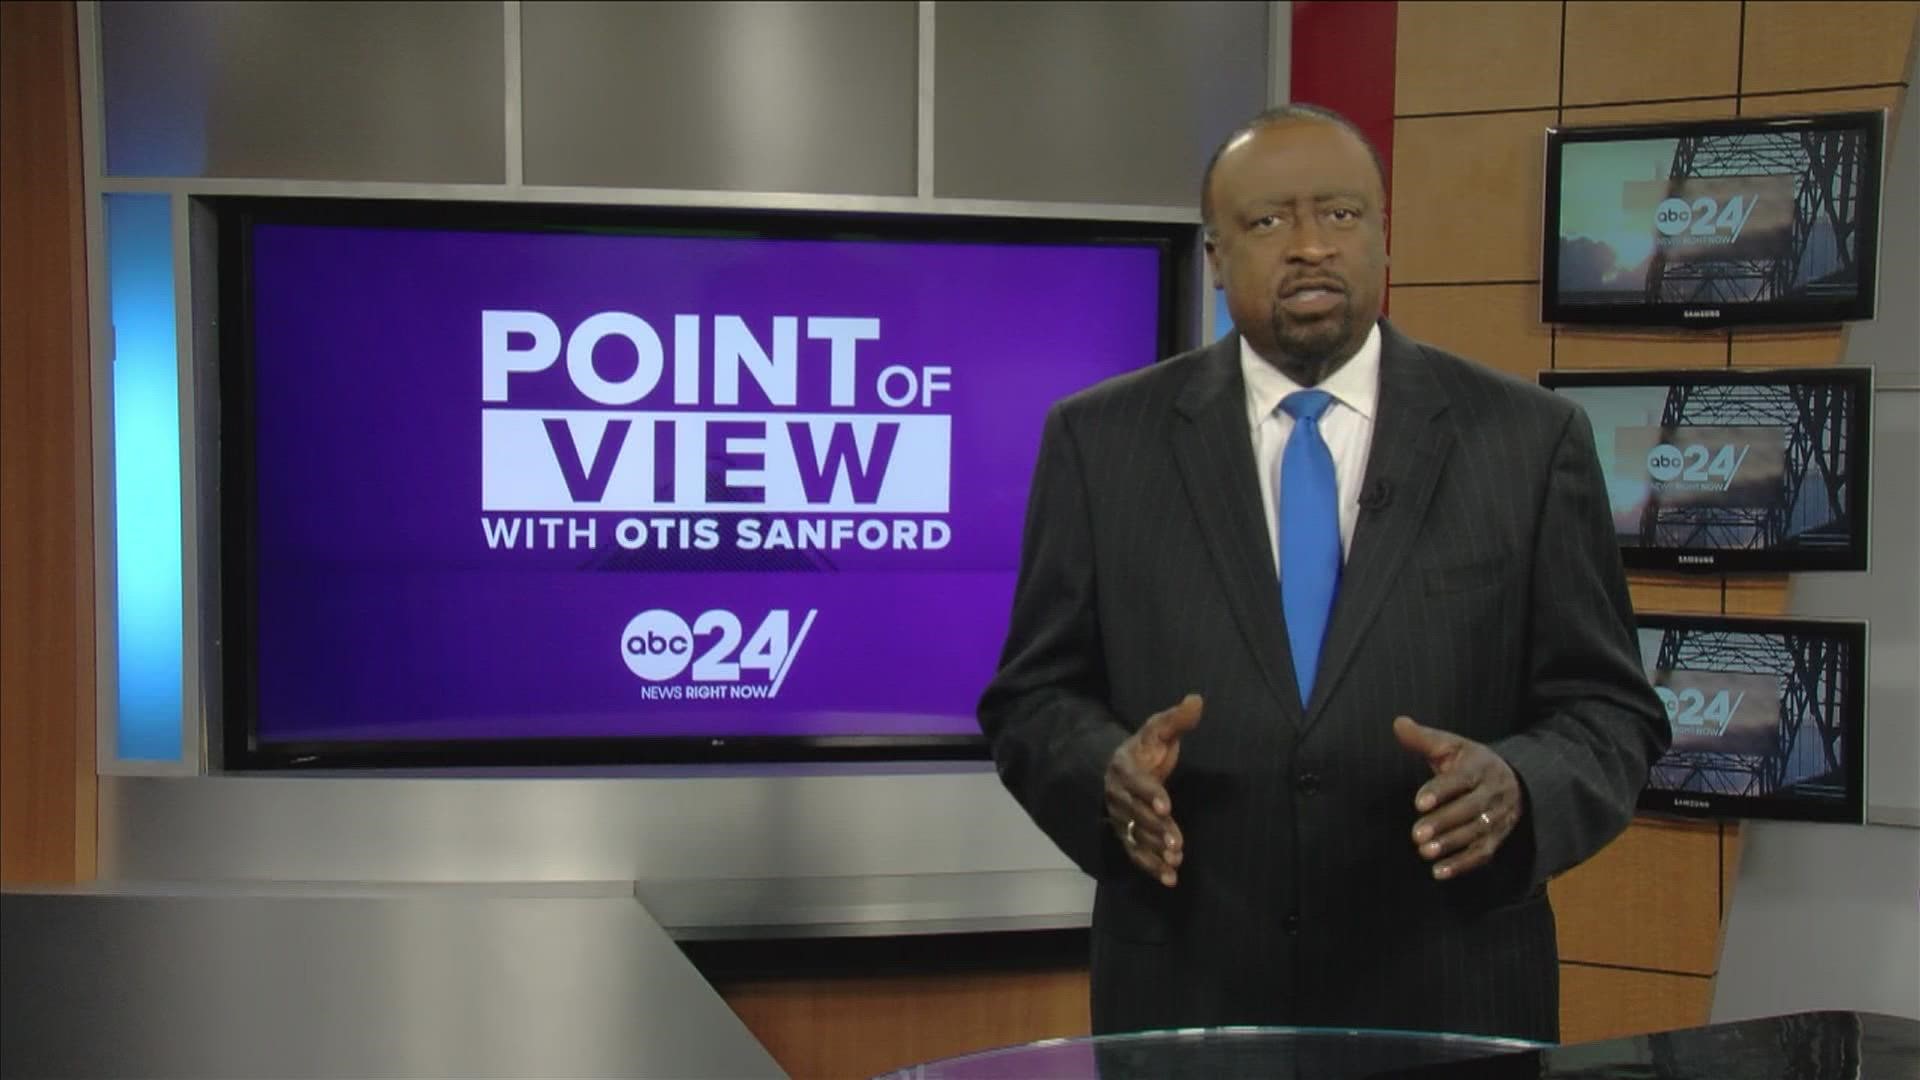 ABC24 political analyst and commentator Otis Sanford shared his point of view on extending term limits for Memphis mayor and city council.